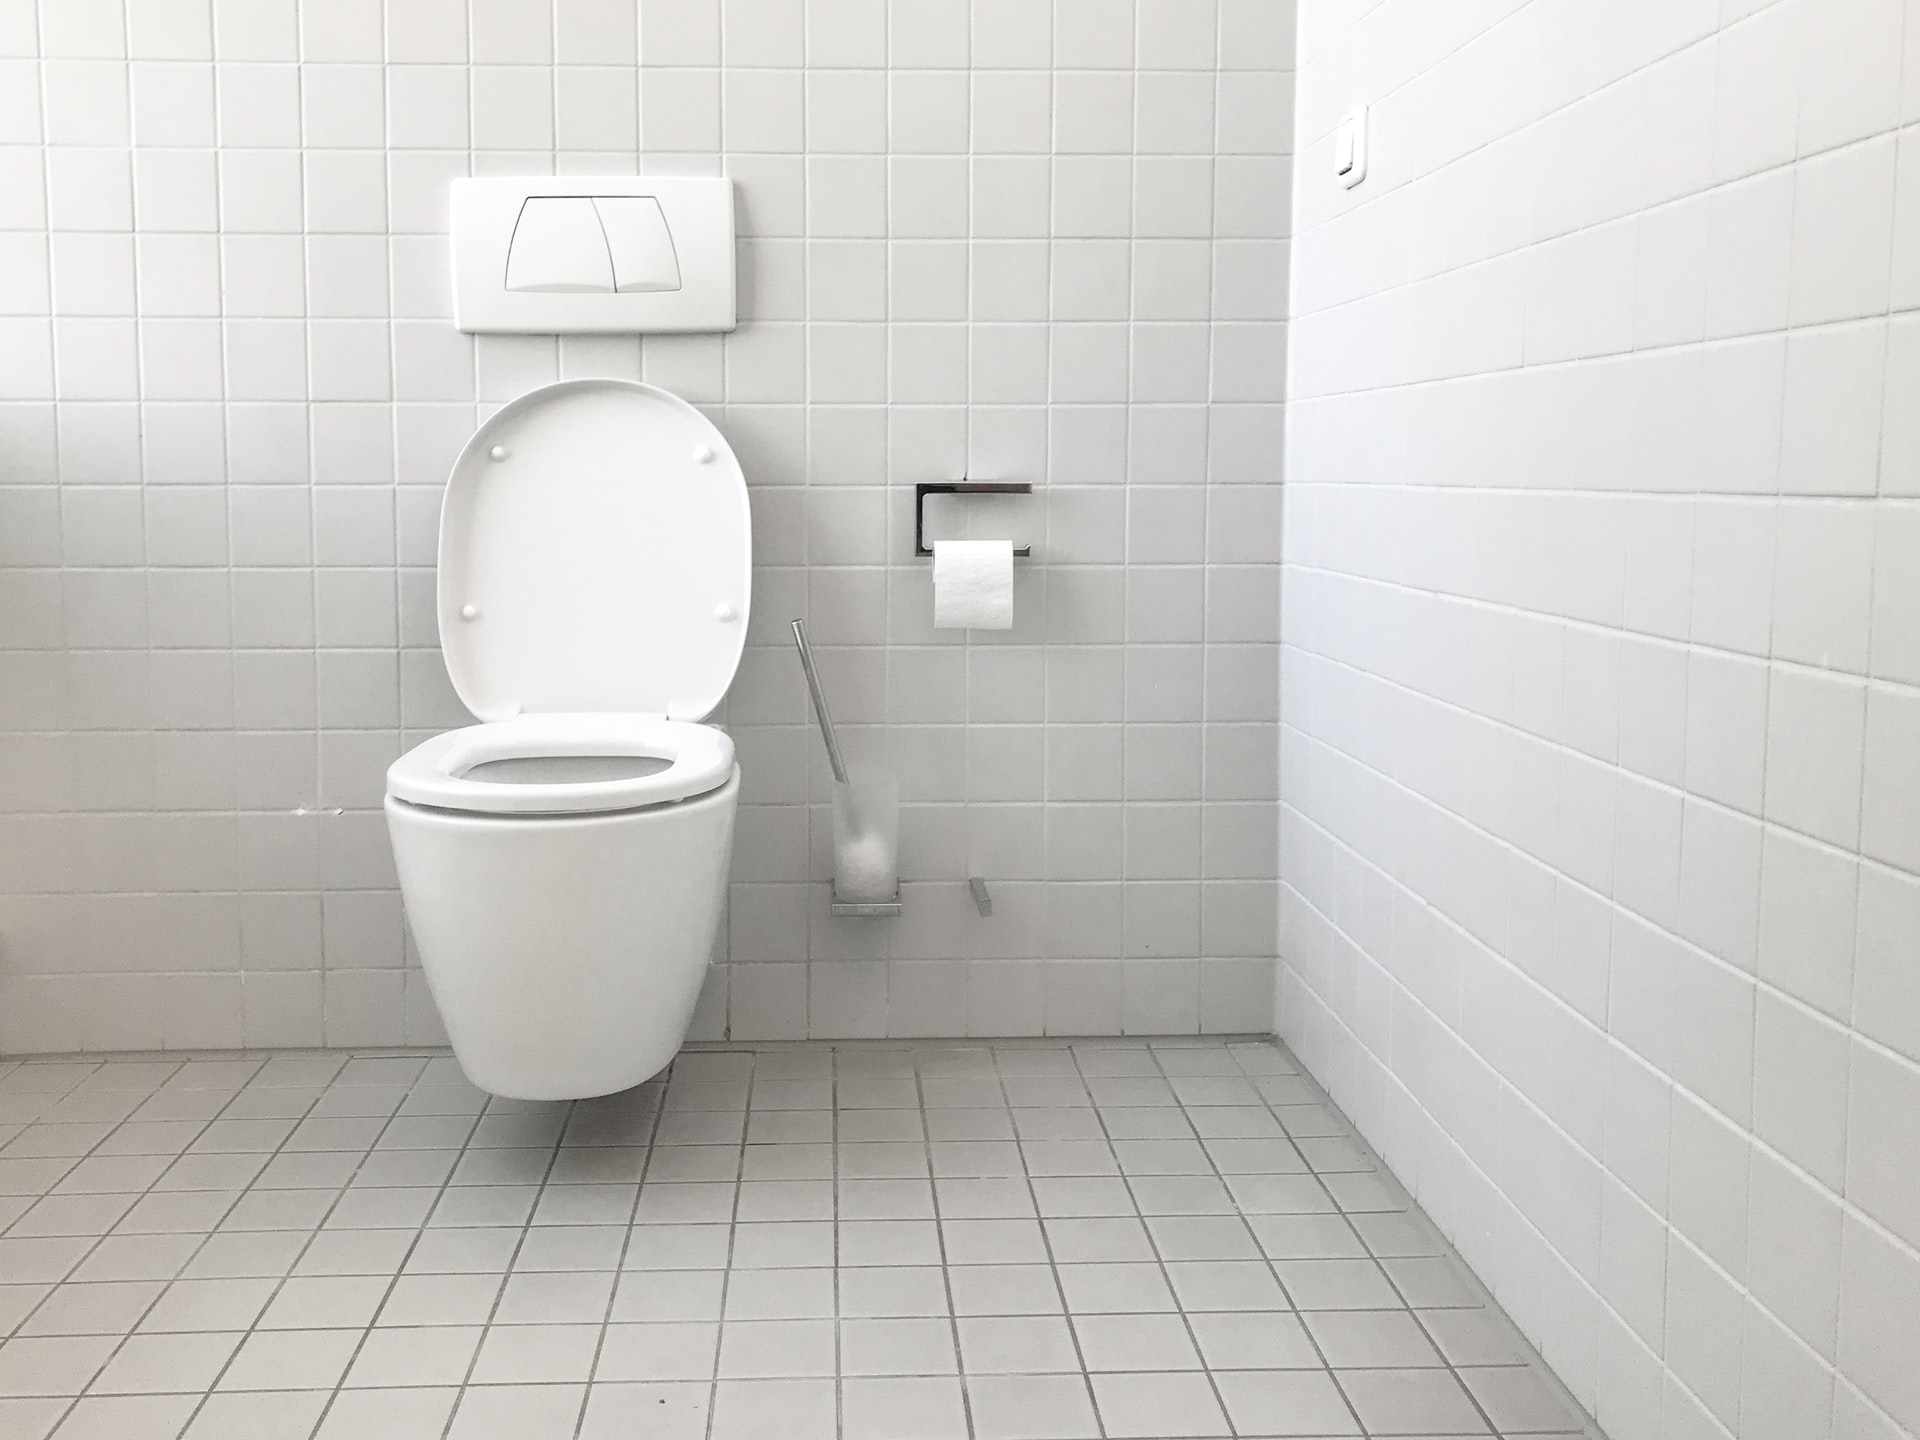 Poor Toilet Hygiene Could Infect You with Coronavirus